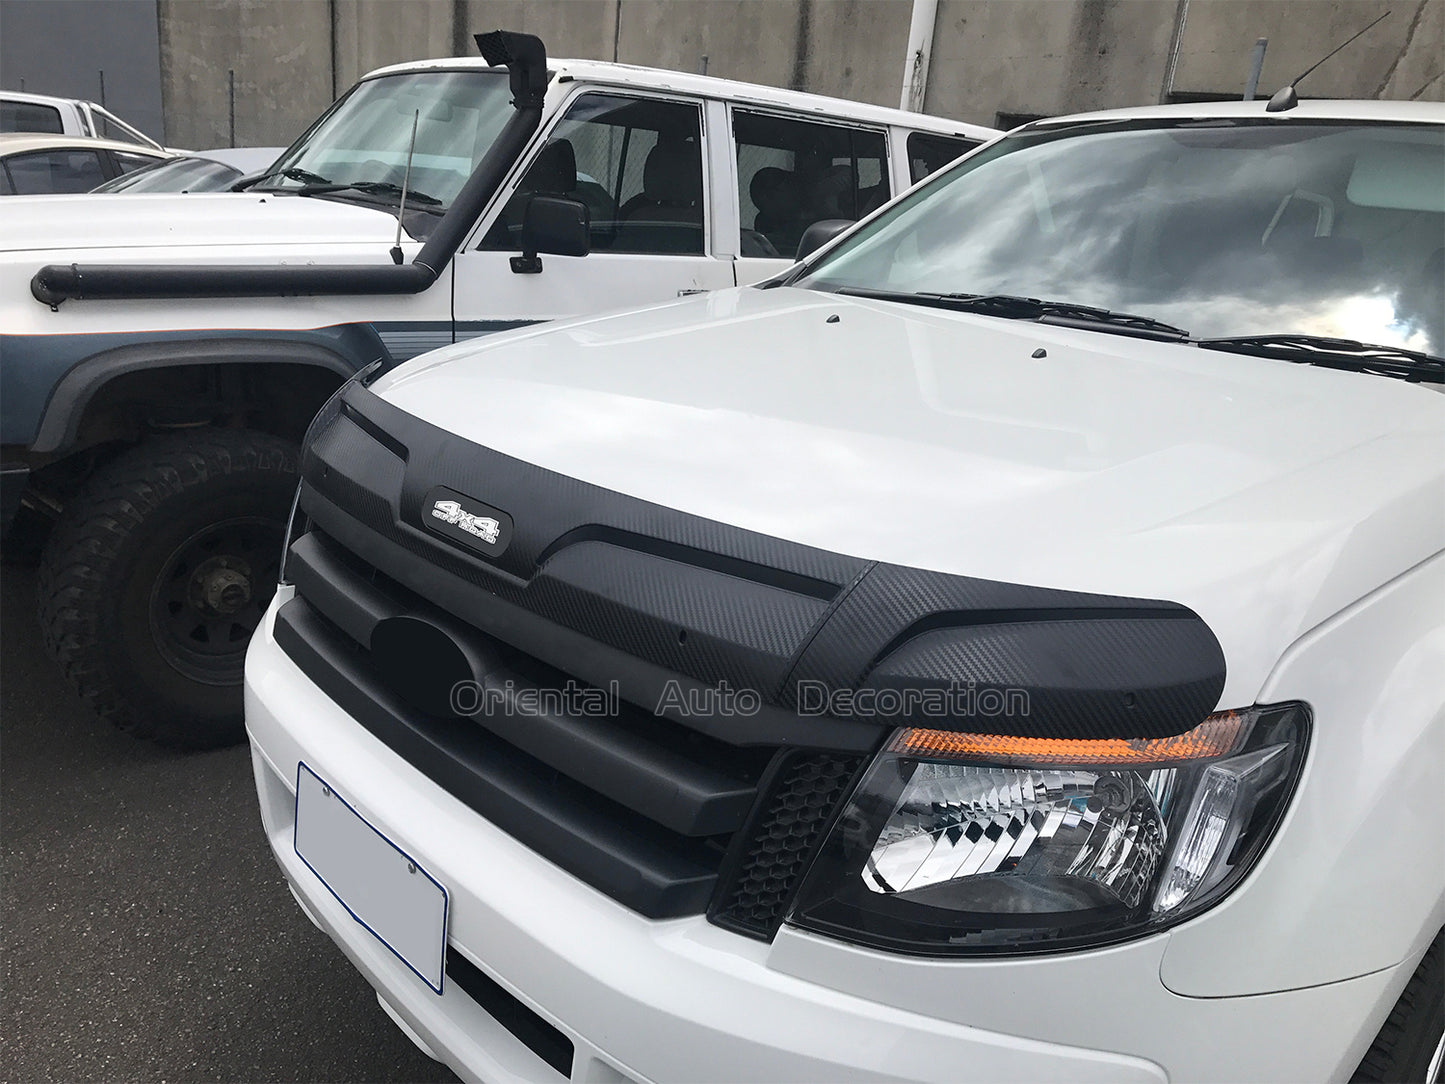 Injection Bonnet Protector & Premium Weathershield for Ford Ranger Extra Cab 2012-2015 4pcs Weather Shields Window Visor + Hood Protector Bonnet Guard